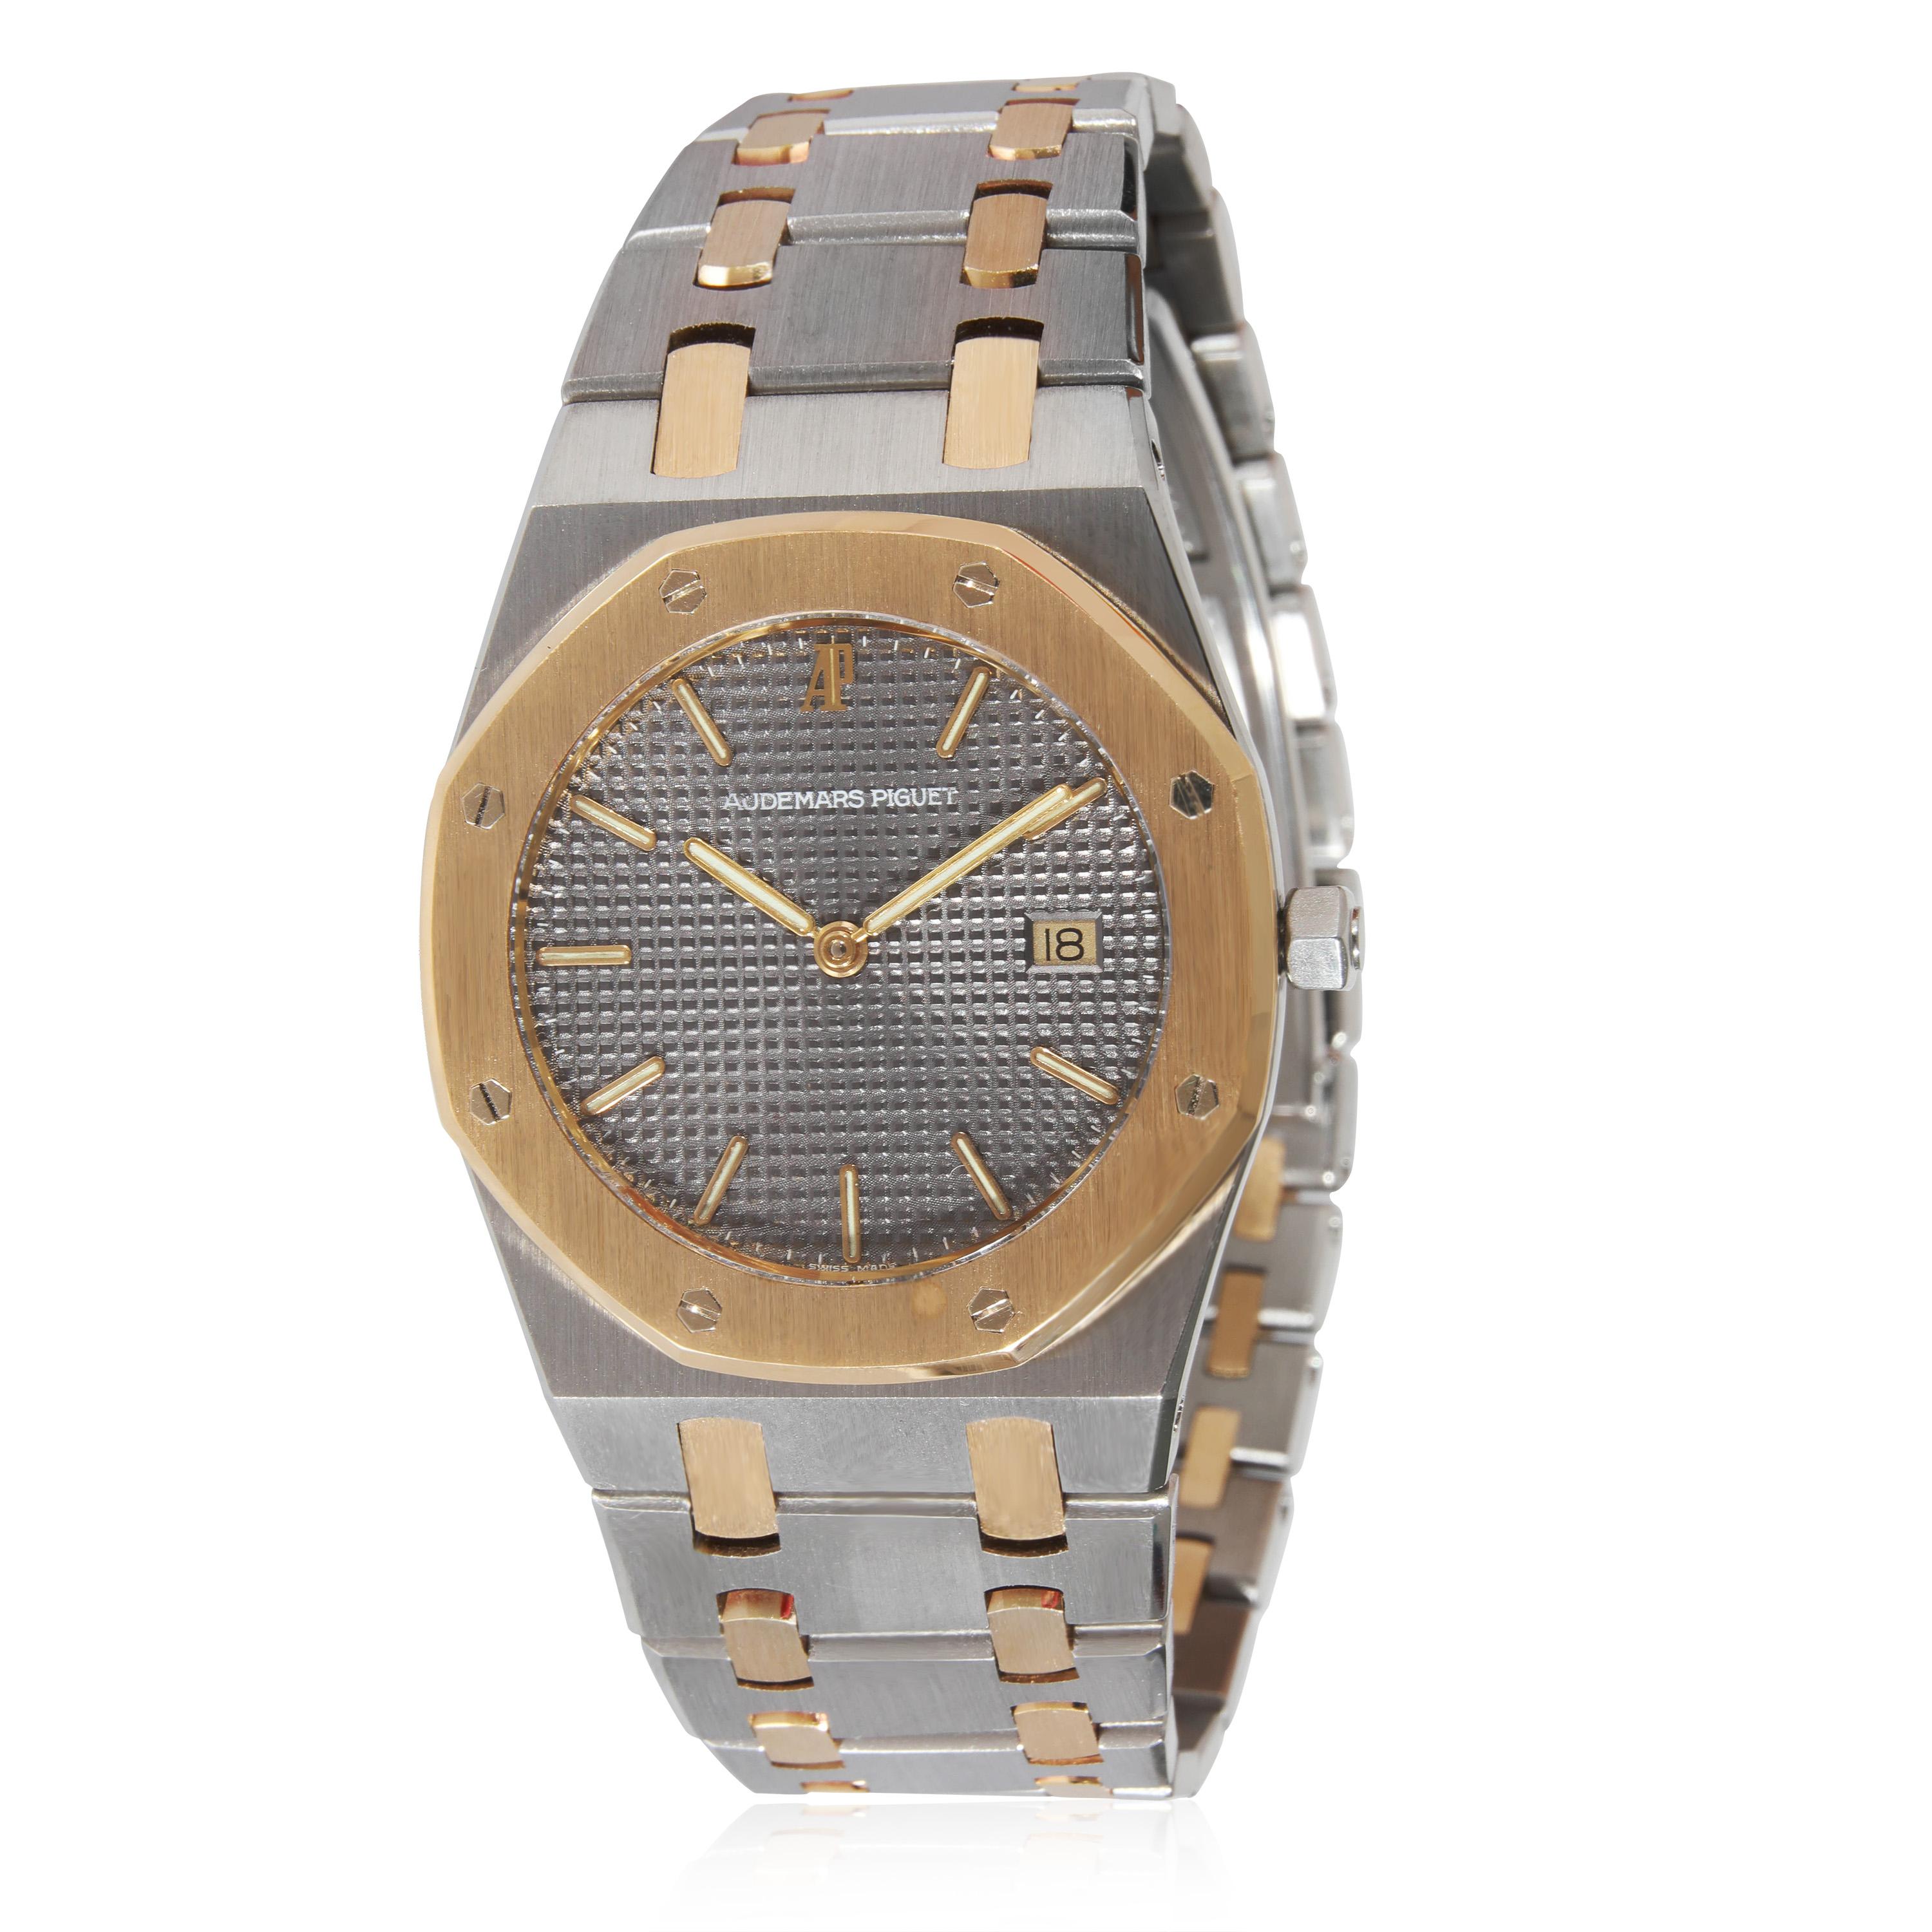 Audemars Piguet Royal Oak 56175SA.OO.0789SA.01 Unisex Watch in 18kt Stainless St

SKU: 130844

PRIMARY DETAILS
Brand: Audemars Piguet
Model: Royal Oak
Country of Origin: Switzerland
Movement Type: Quartz: Battery
Year of Manufacture: